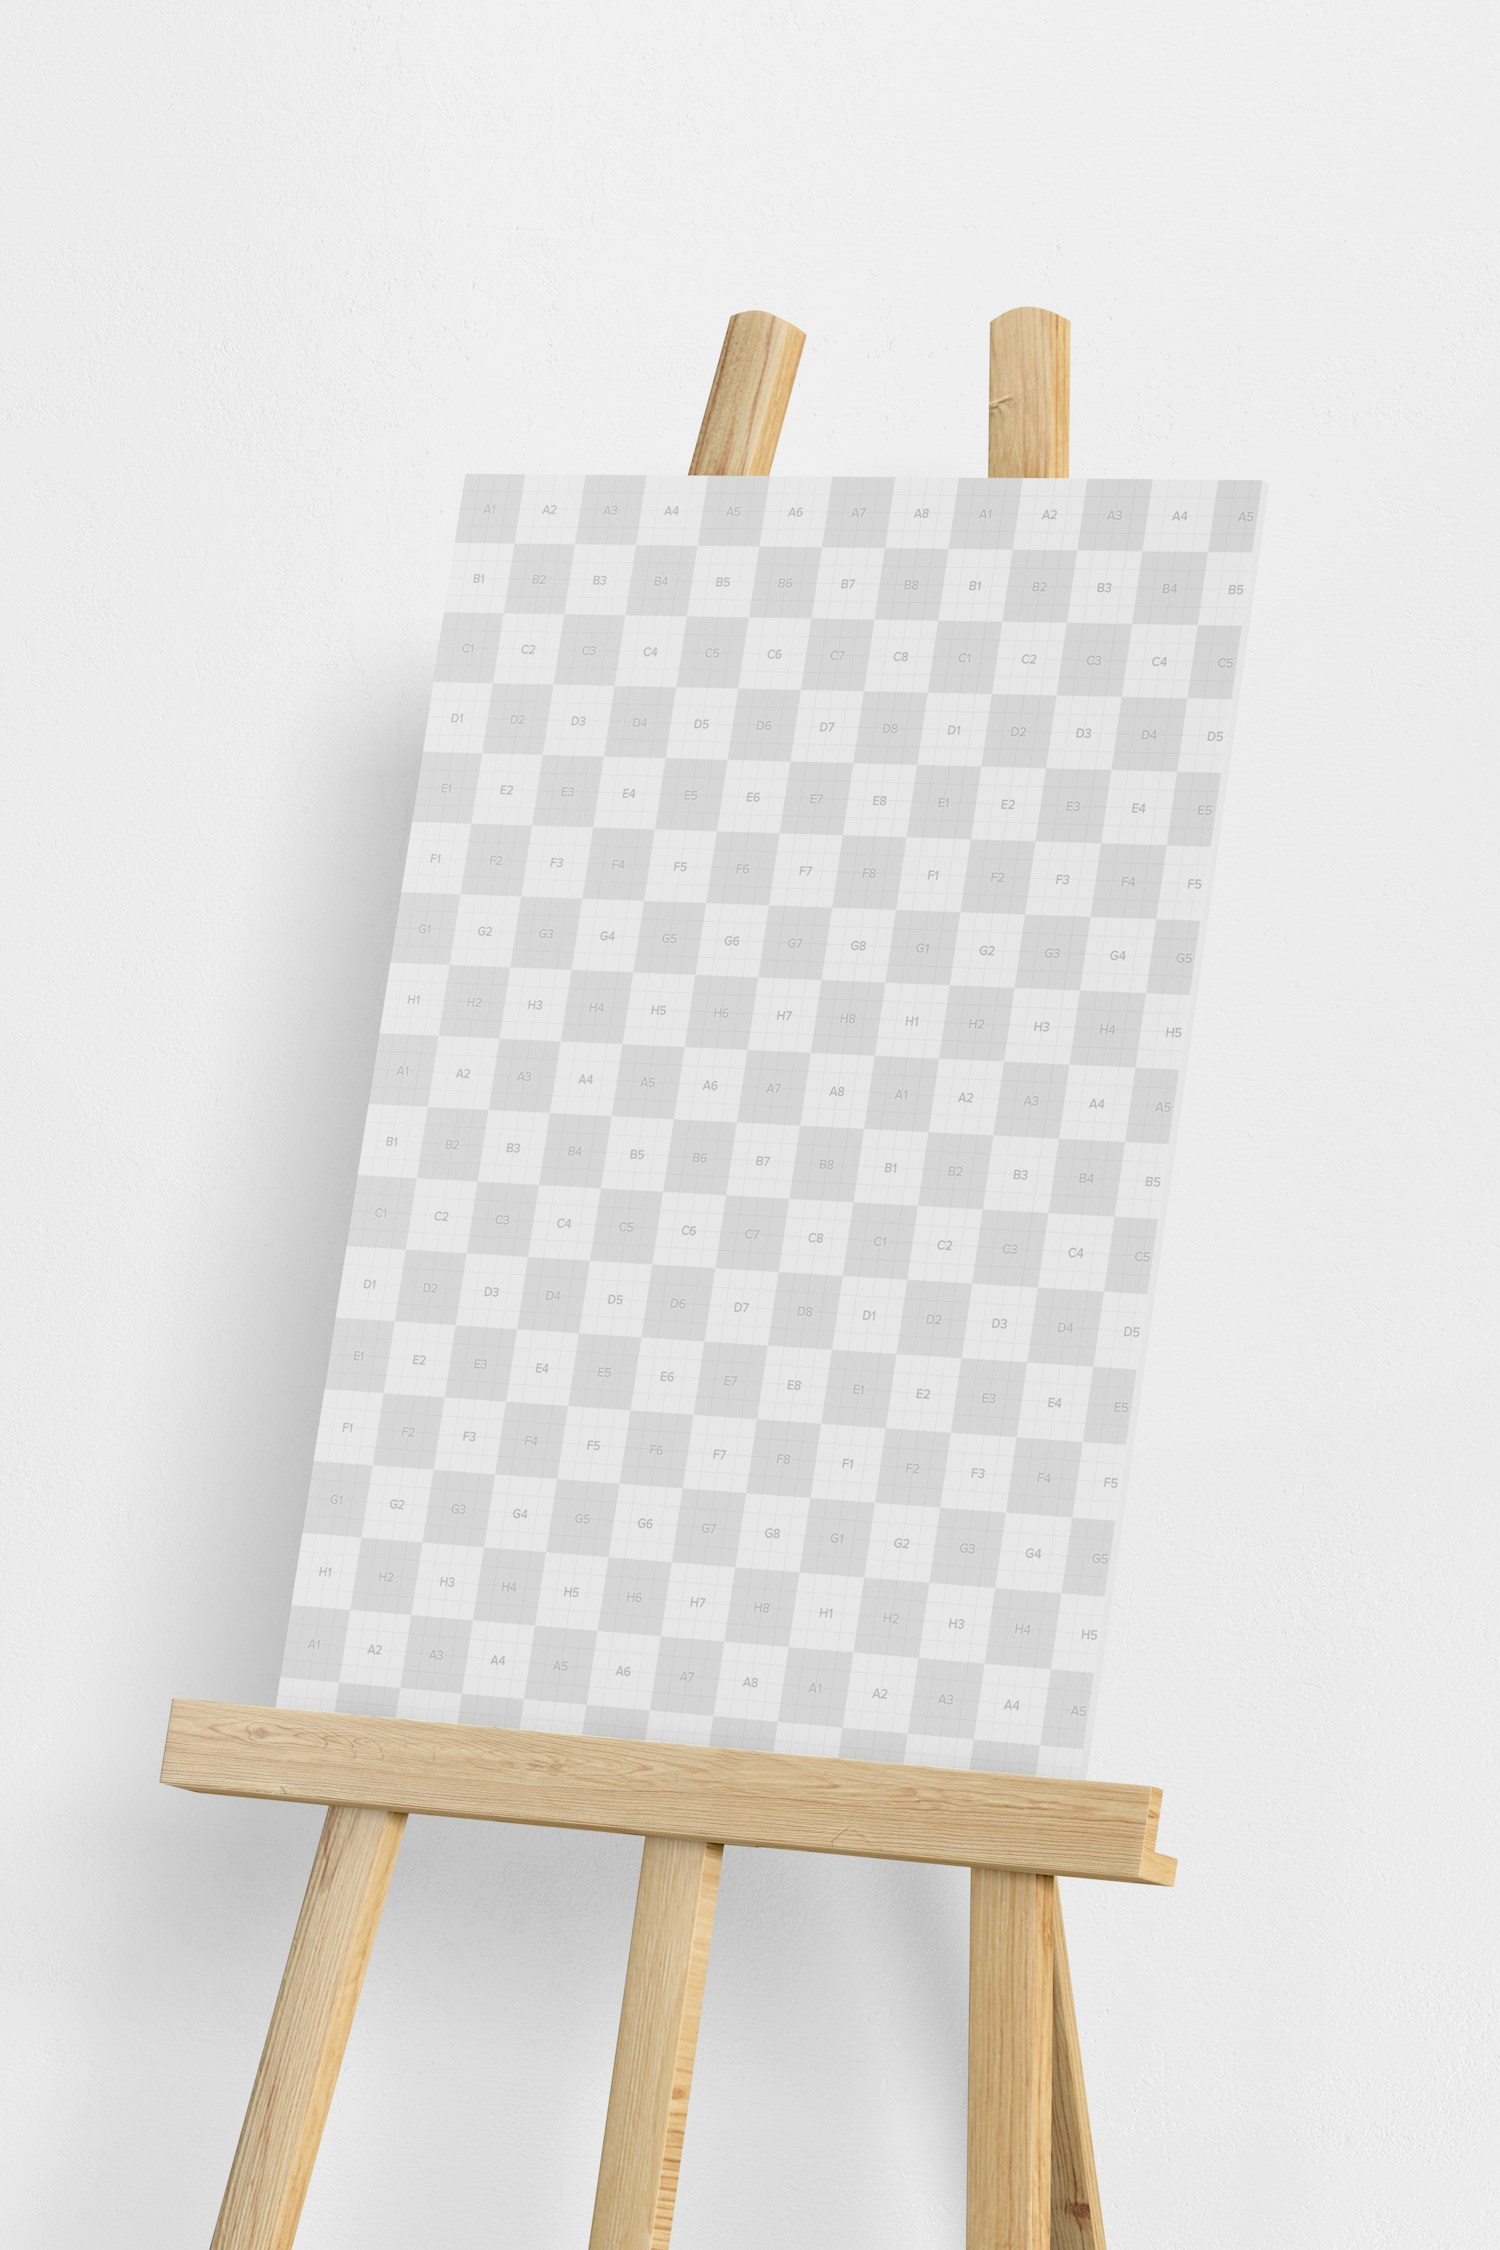 Poster Easel Stand Mockup, Close Up